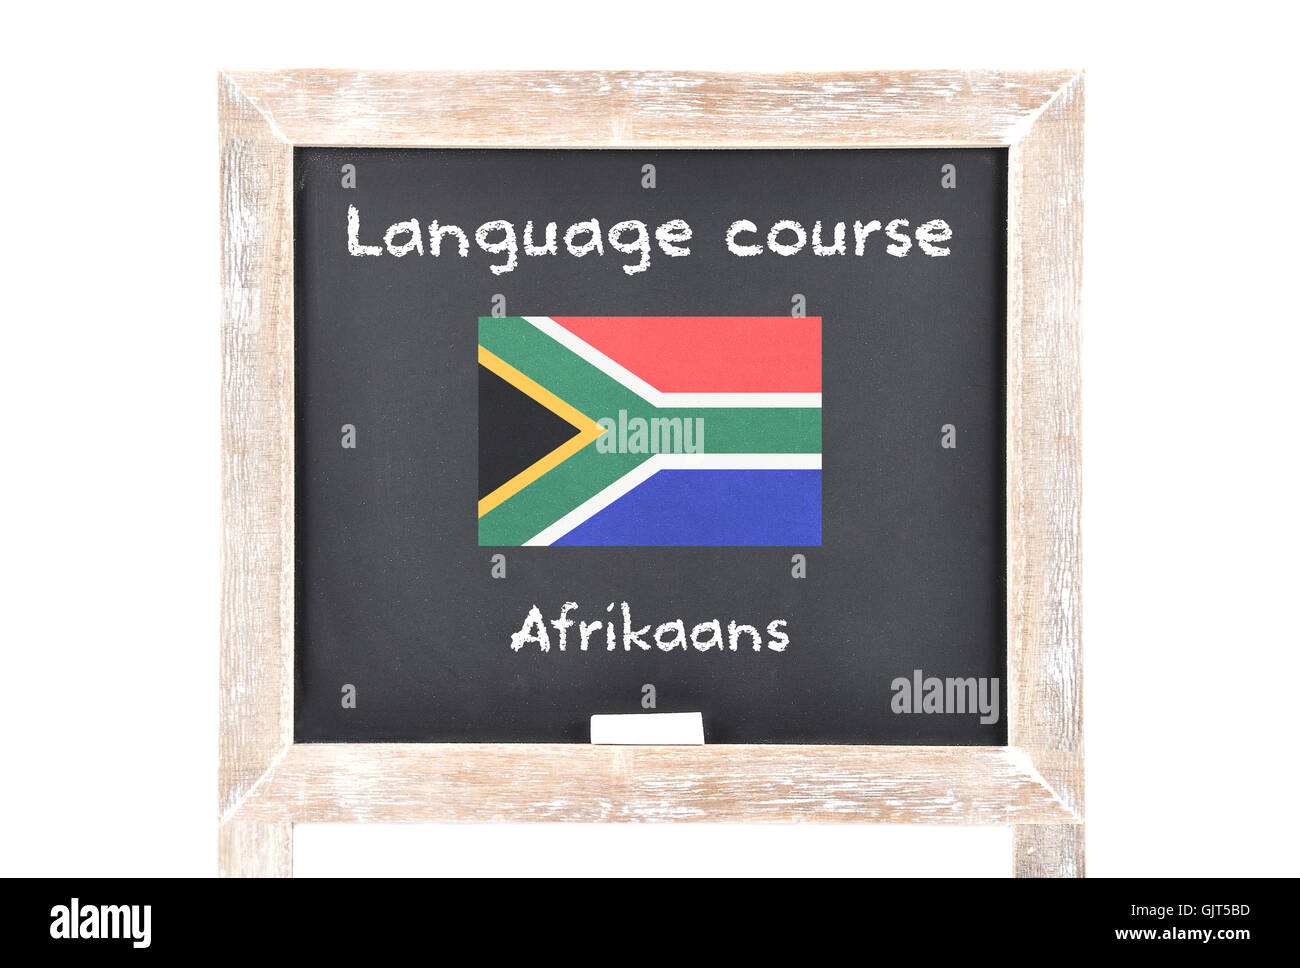 Language course with flag on board Stock Photo